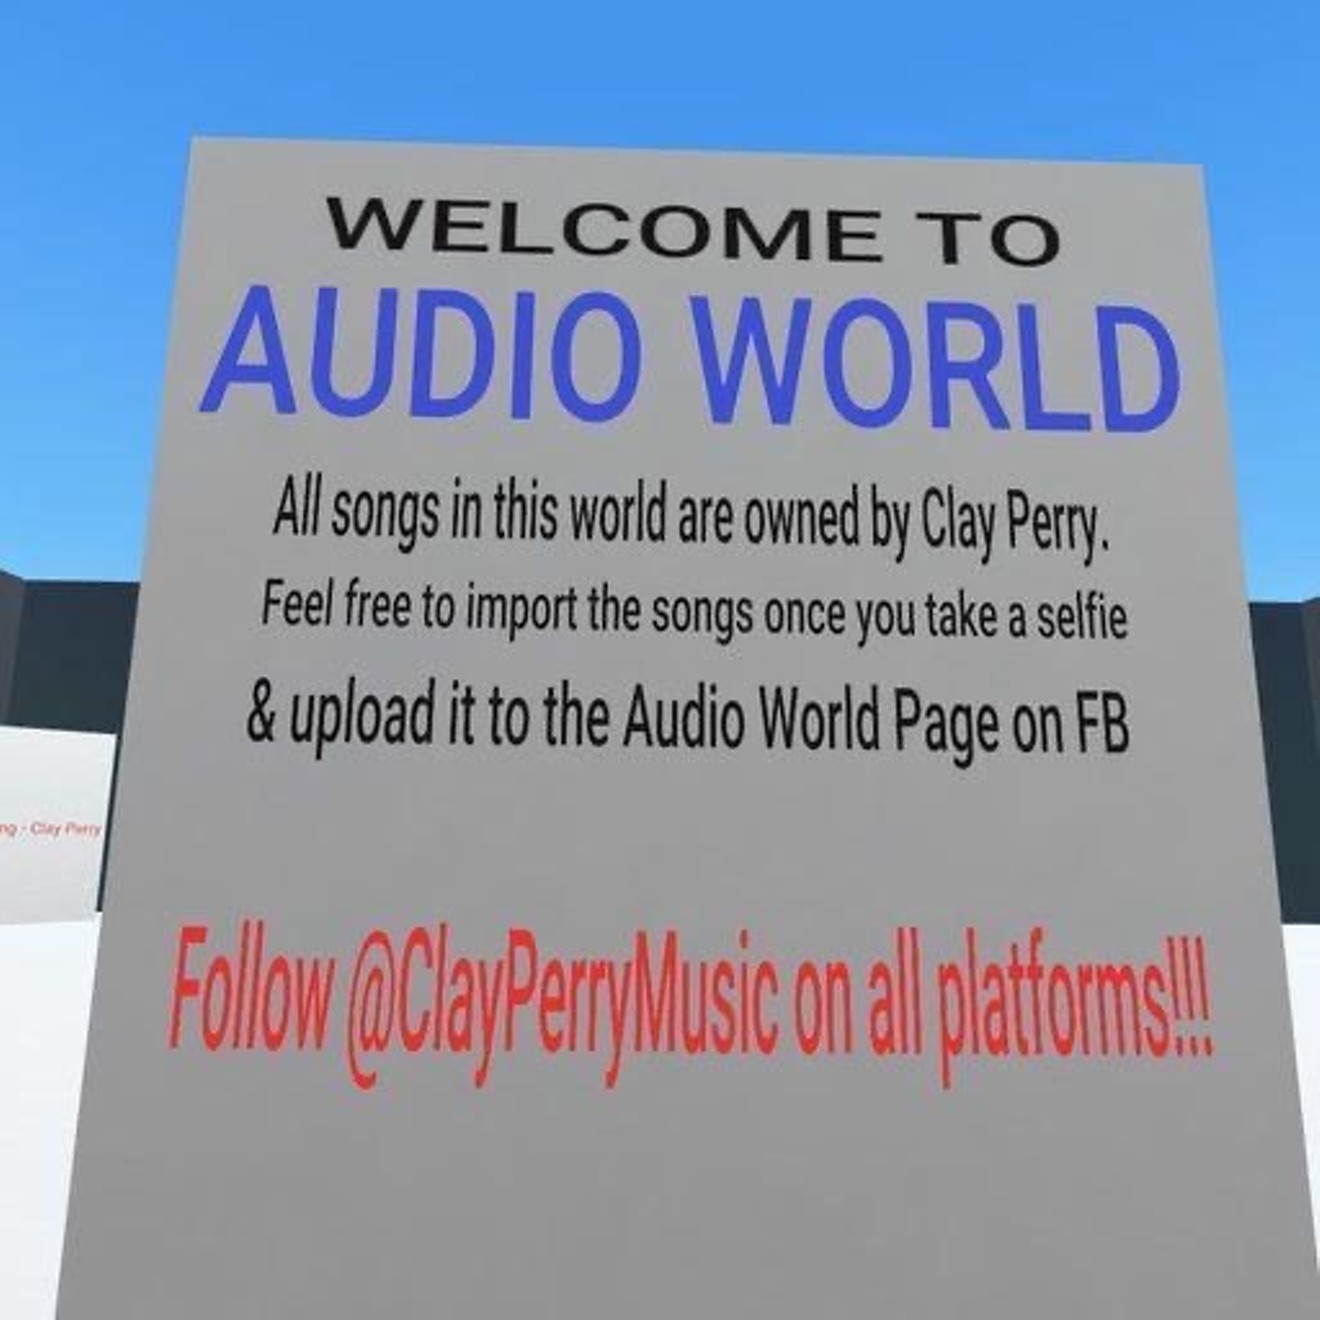 People have to post a photo on a Facebook page Clay Perry made for his "Audio World" that will let him know they want access to his tracks in their virtual space.